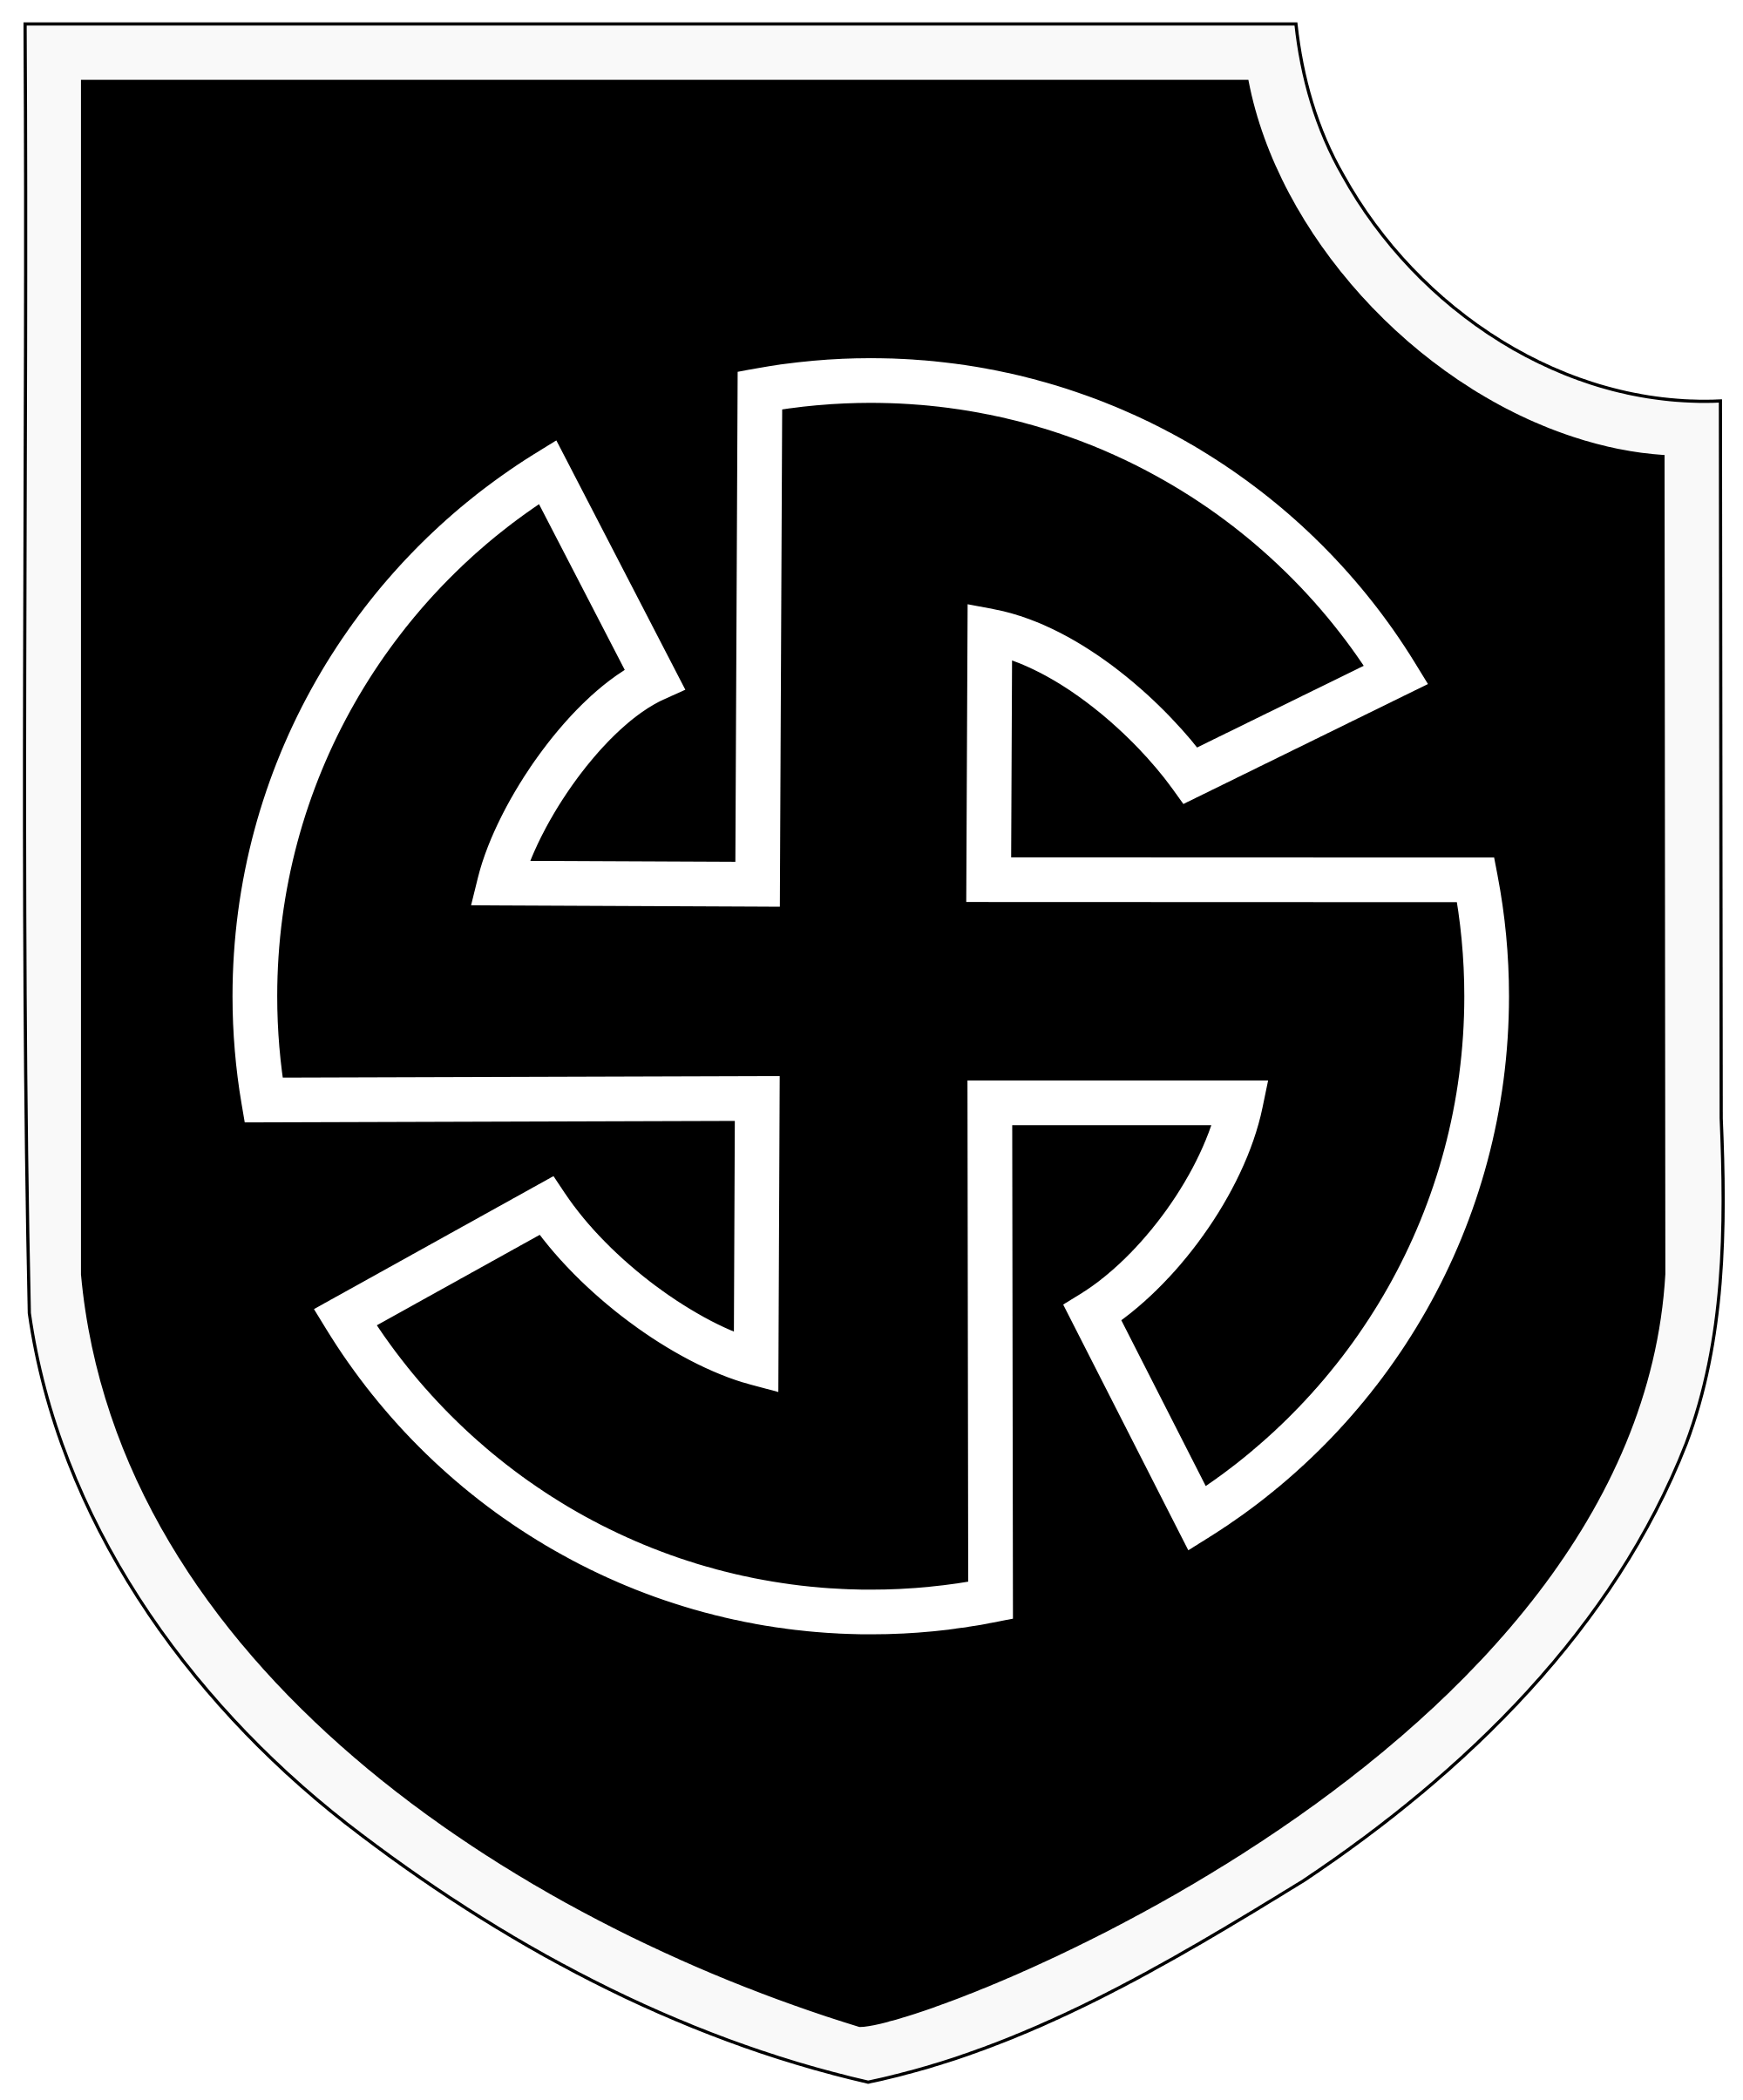 Nazi SS Logo - 5th SS Panzer Division Wiking